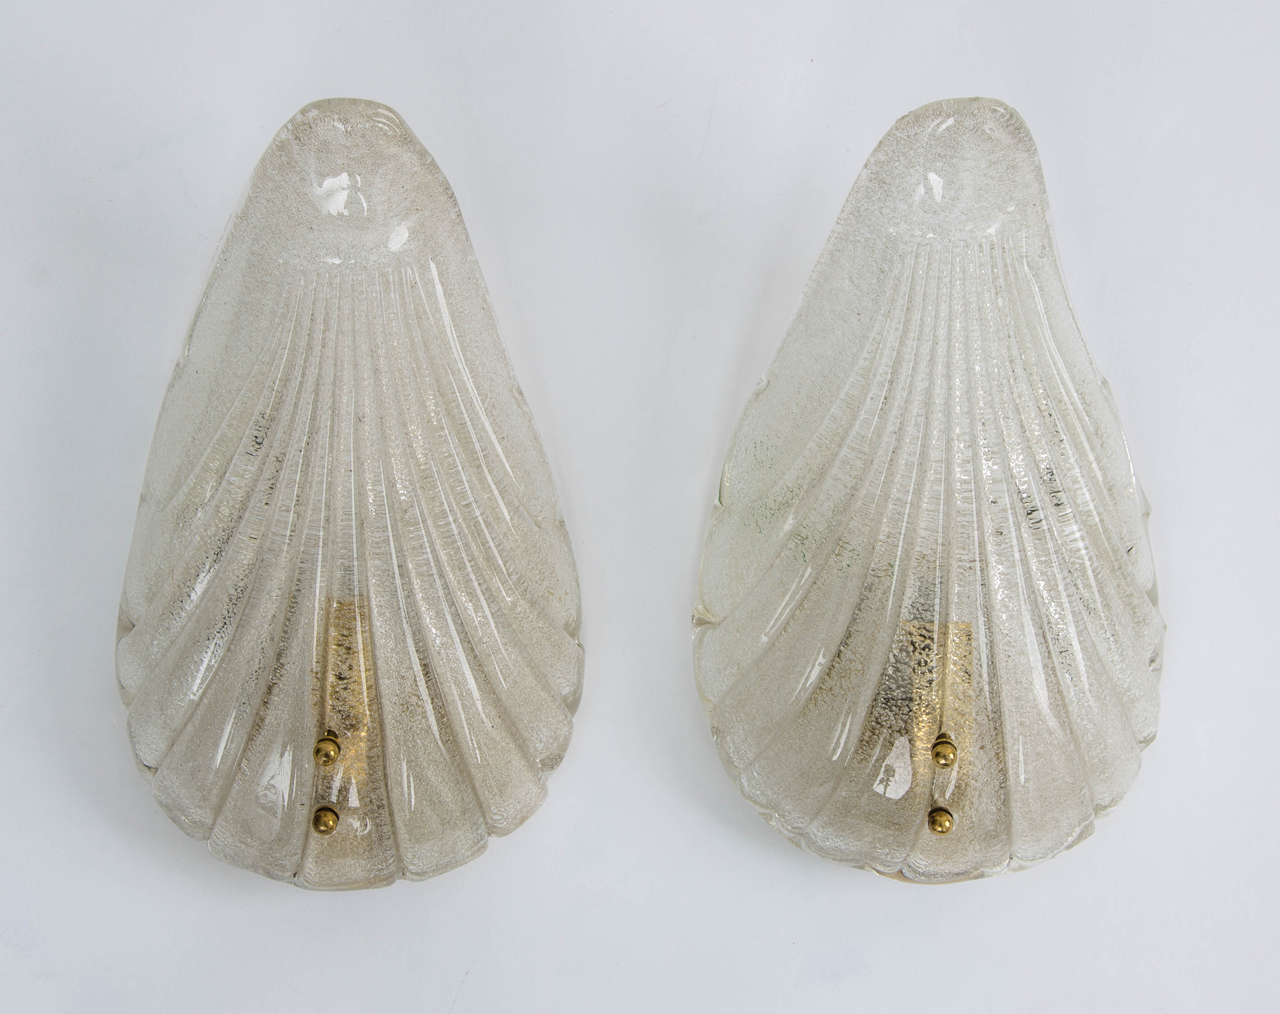 Pair of wall lights by Mazzega, prod., Italy, Murano, circa 1940.
Dimensions: Height 27.00 cm - 10.62 in.
Max width 17.00 cm - 6.69 in.
Min width 6.00 cm - 2.36 in.
Depth 9.50 cm - 3.73 in.
Free shipping to London.